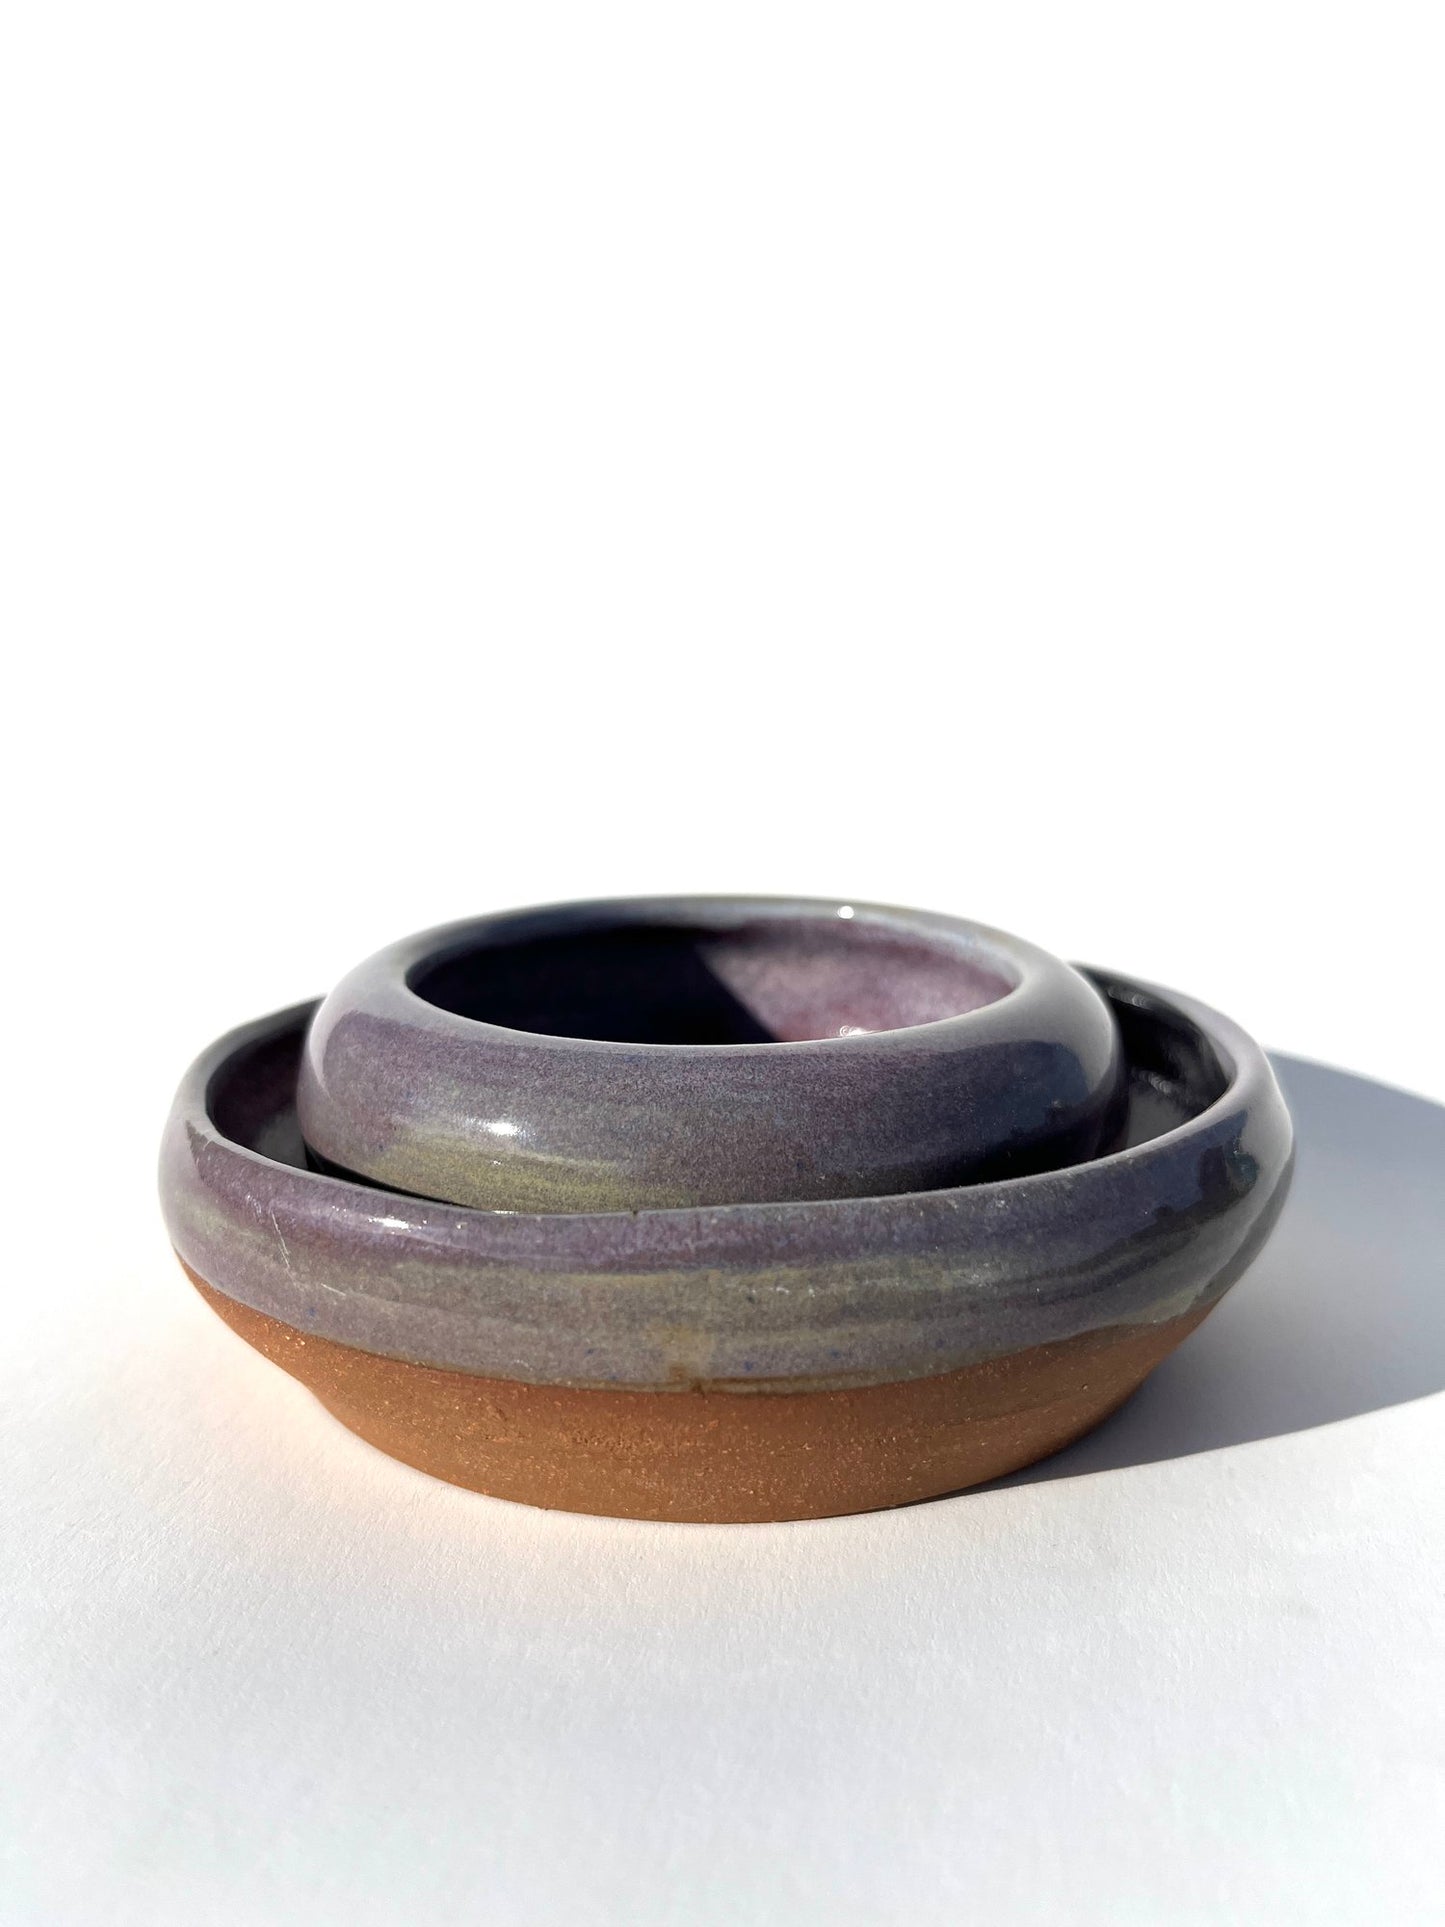 Hand thrown and hand dipped glazed ceramic nesting bowls by Ninth House Goods. A pair of nesting bowls that would be perfect for oil dipping, salsa, or your special jewels and artifacts.